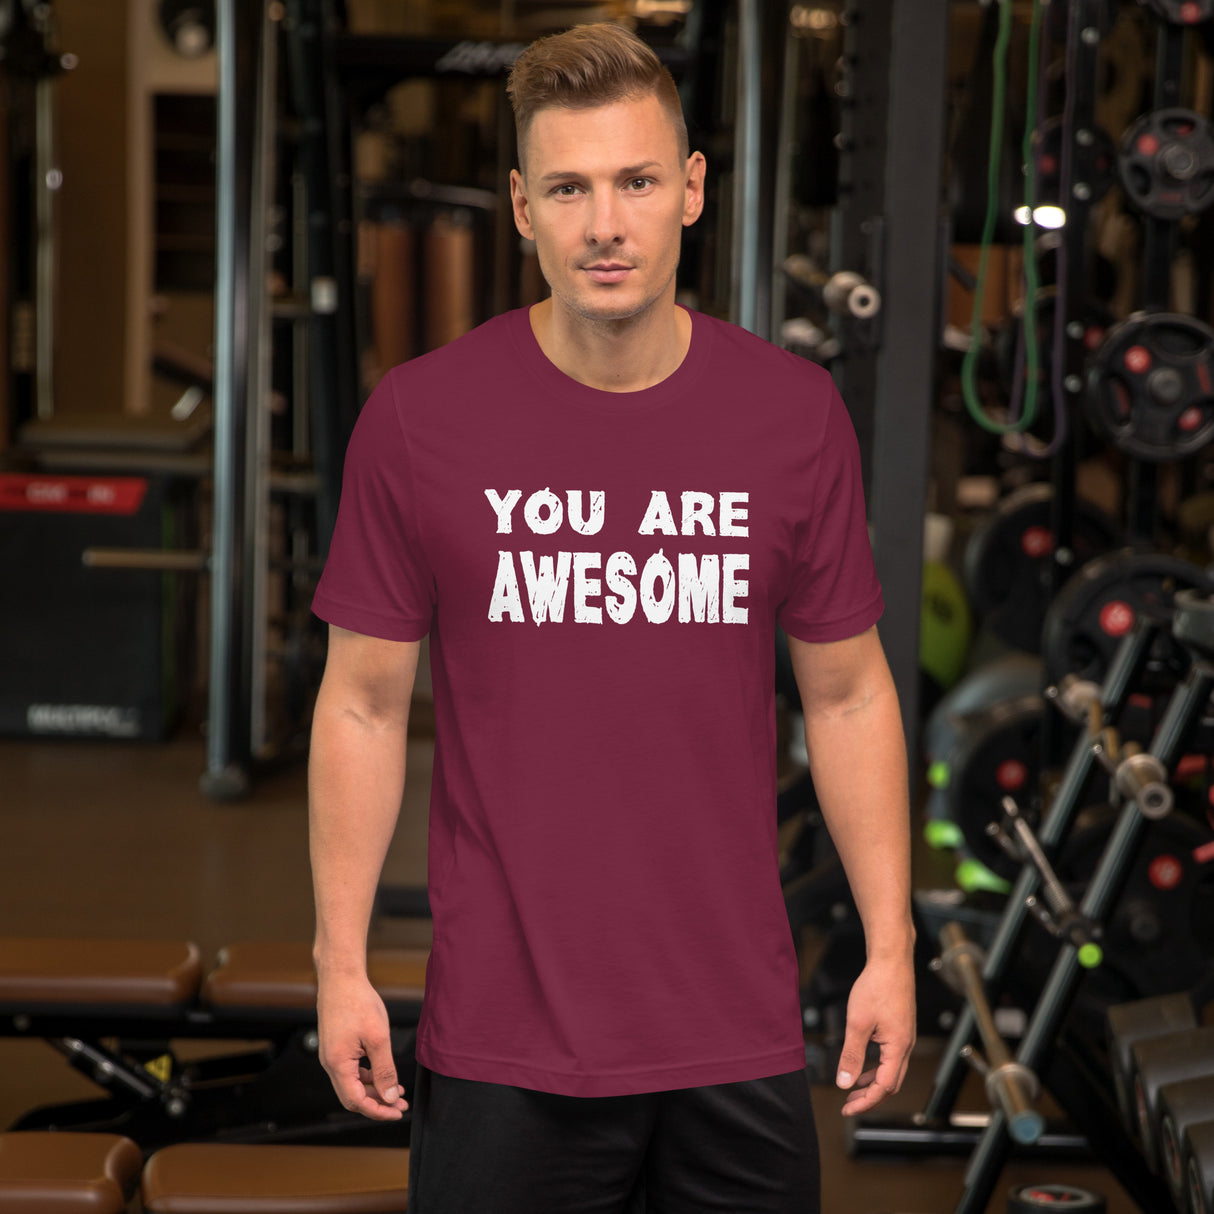 You Are Awesome Men's Shirt